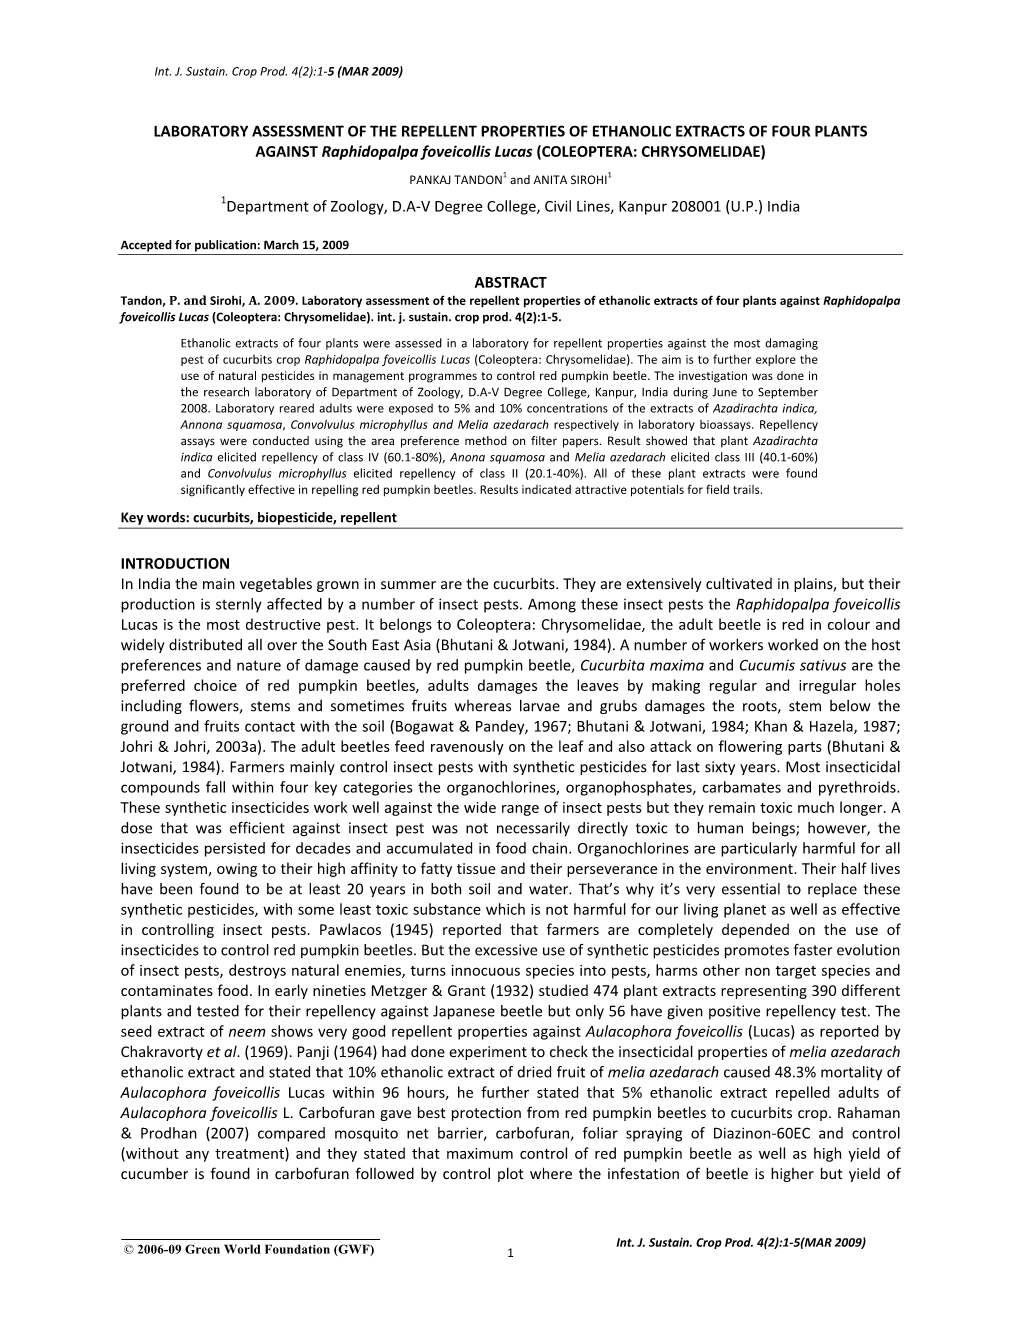 LABORATORY ASSESSMENT of the REPELLENT PROPERTIES of ETHANOLIC EXTRACTS of FOUR PLANTS AGAINST Raphidopalpa Foveicollis Lucas (